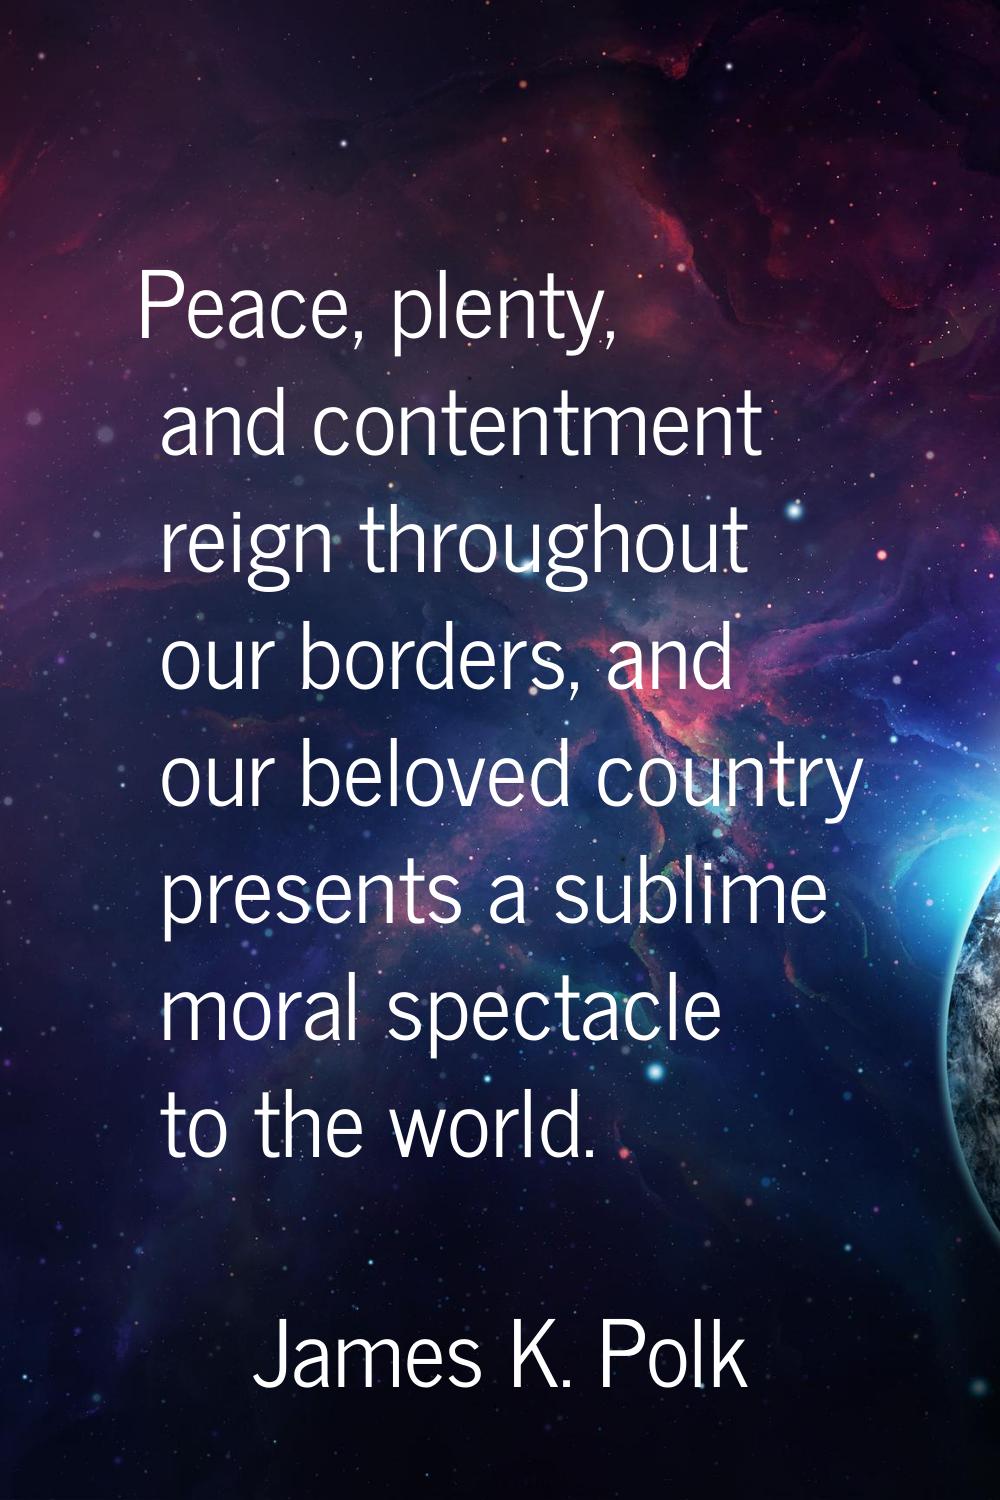 Peace, plenty, and contentment reign throughout our borders, and our beloved country presents a sub